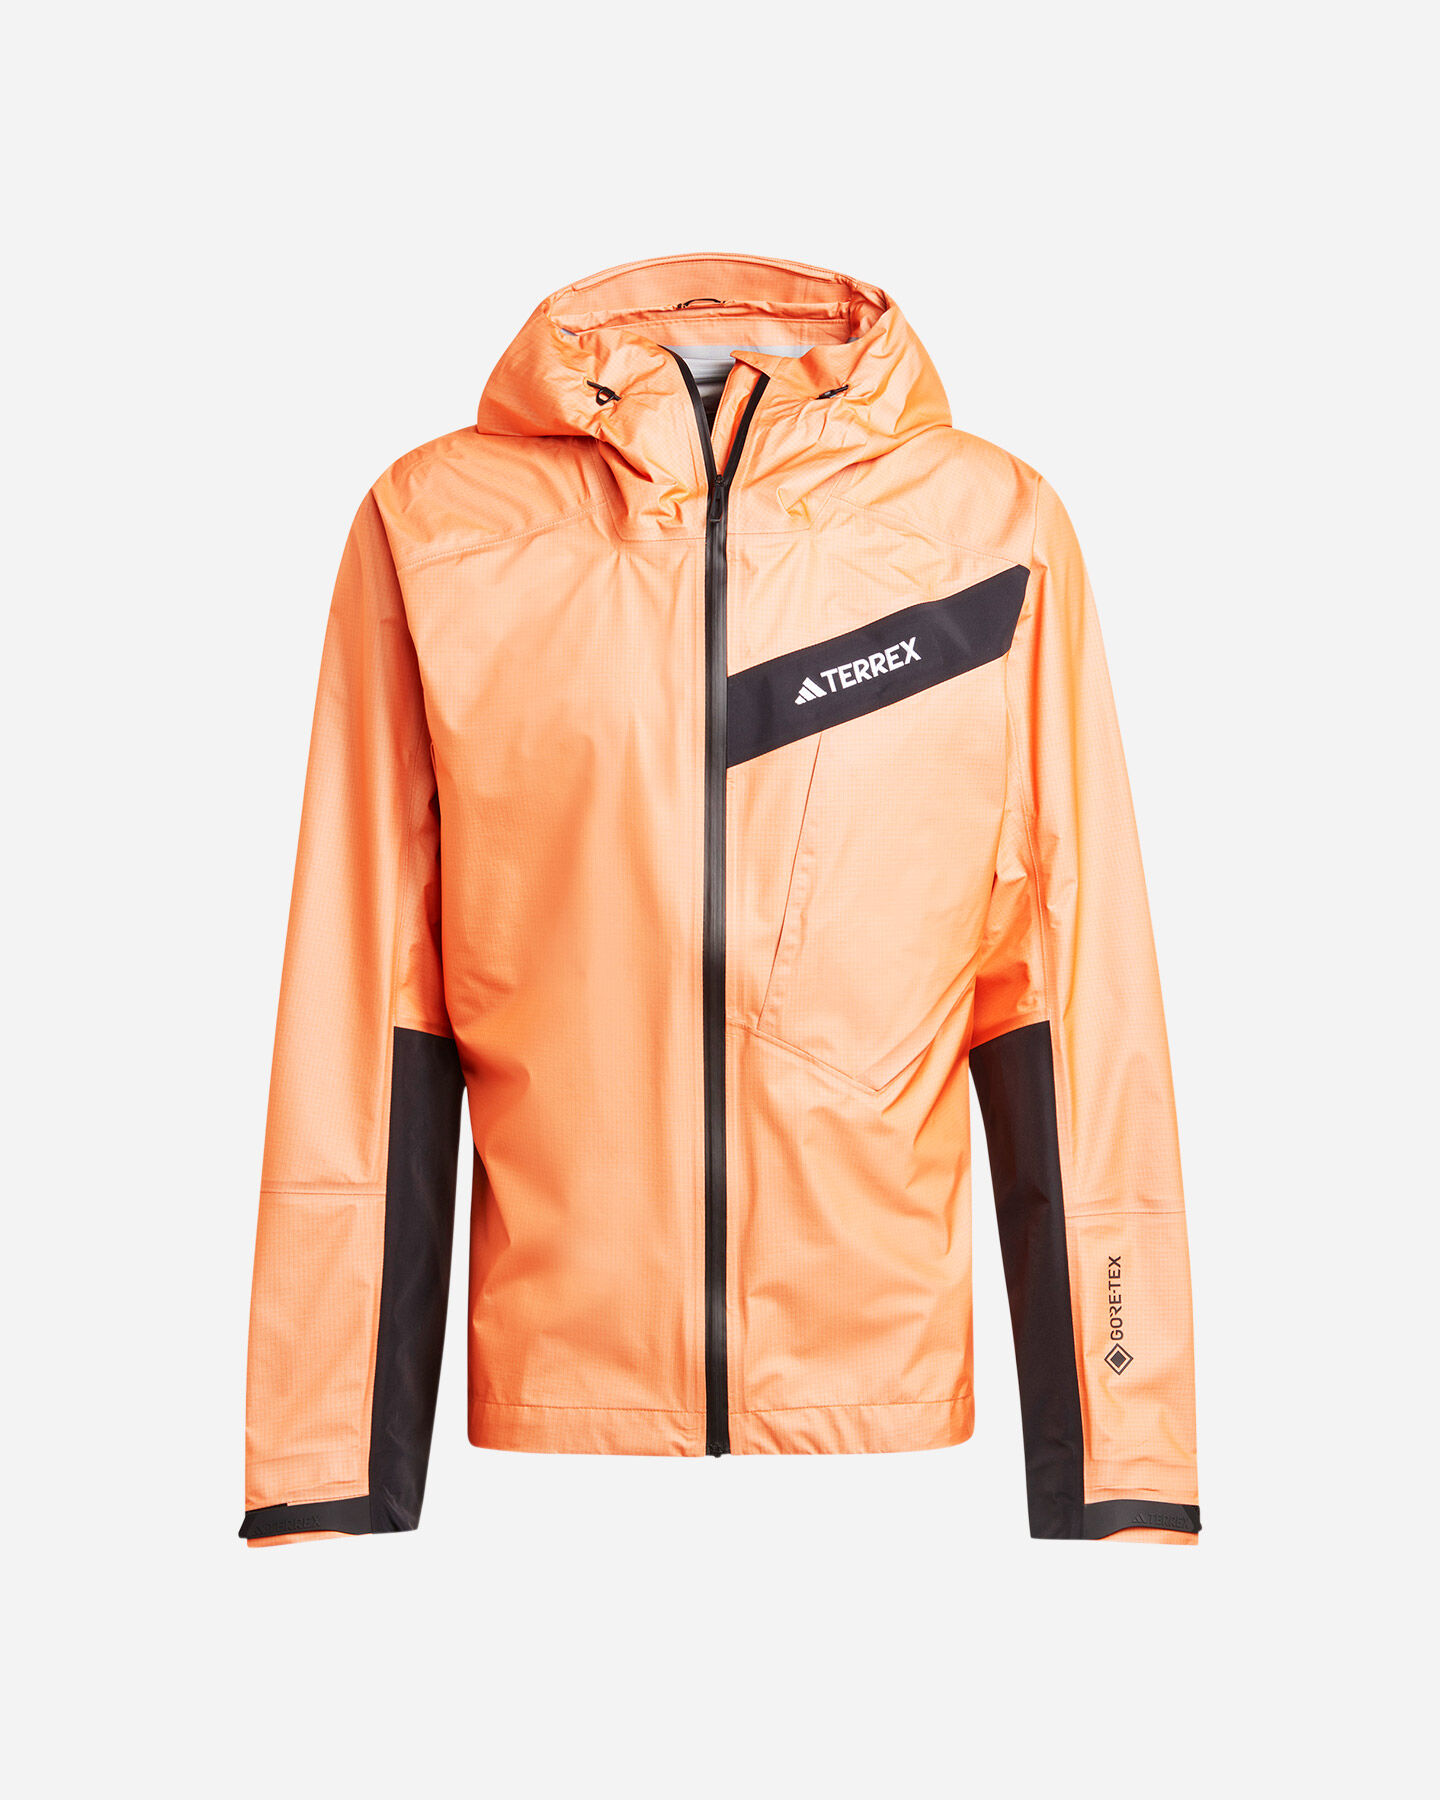  Giacca outdoor ADIDAS TRK GORE ACT M S5654440|UNI|S scatto 0